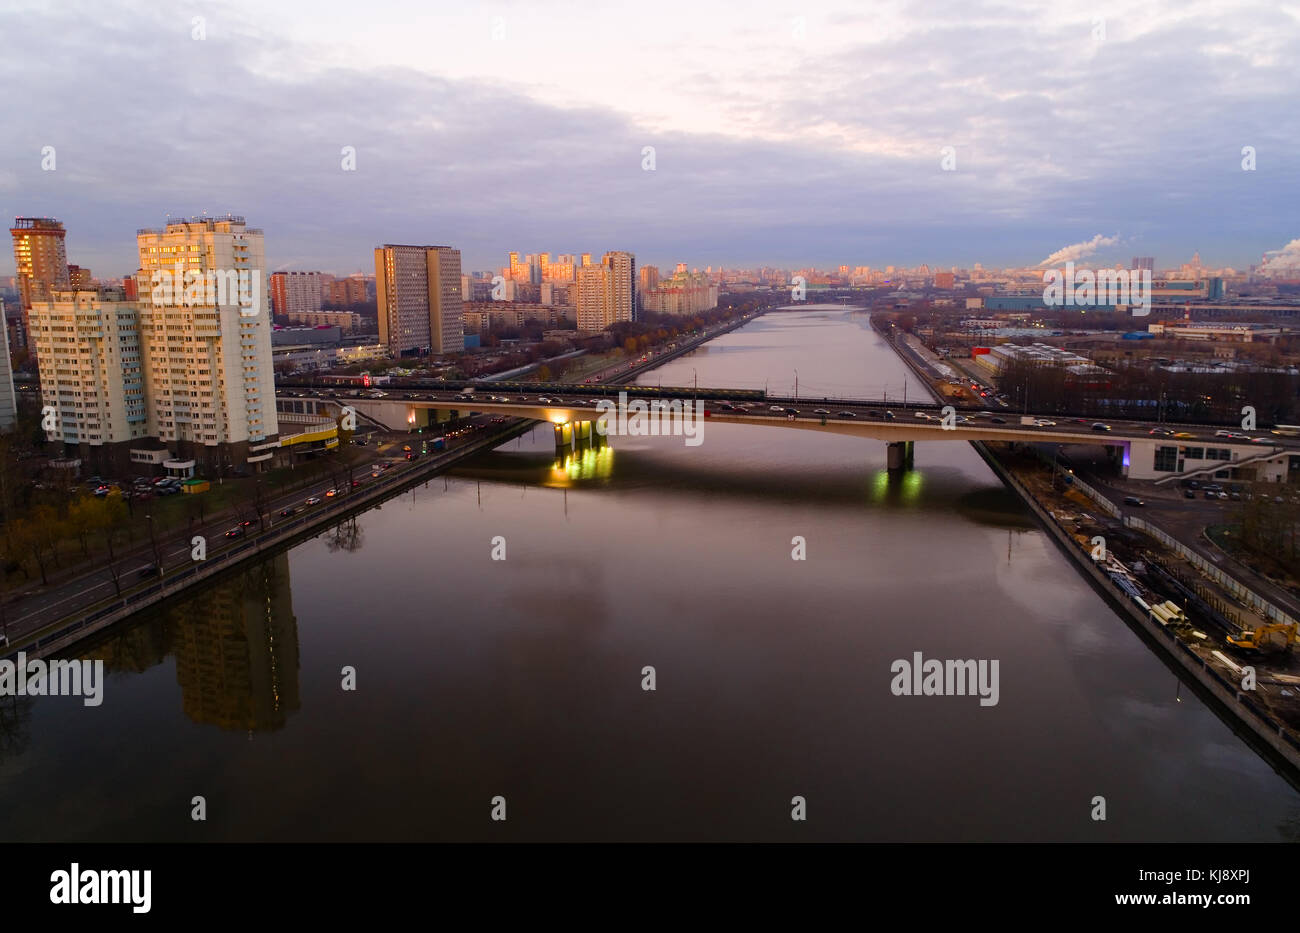 Moscow at dawn. A bridge over the Moskva River on the Andropov Avenue. Stock Photo